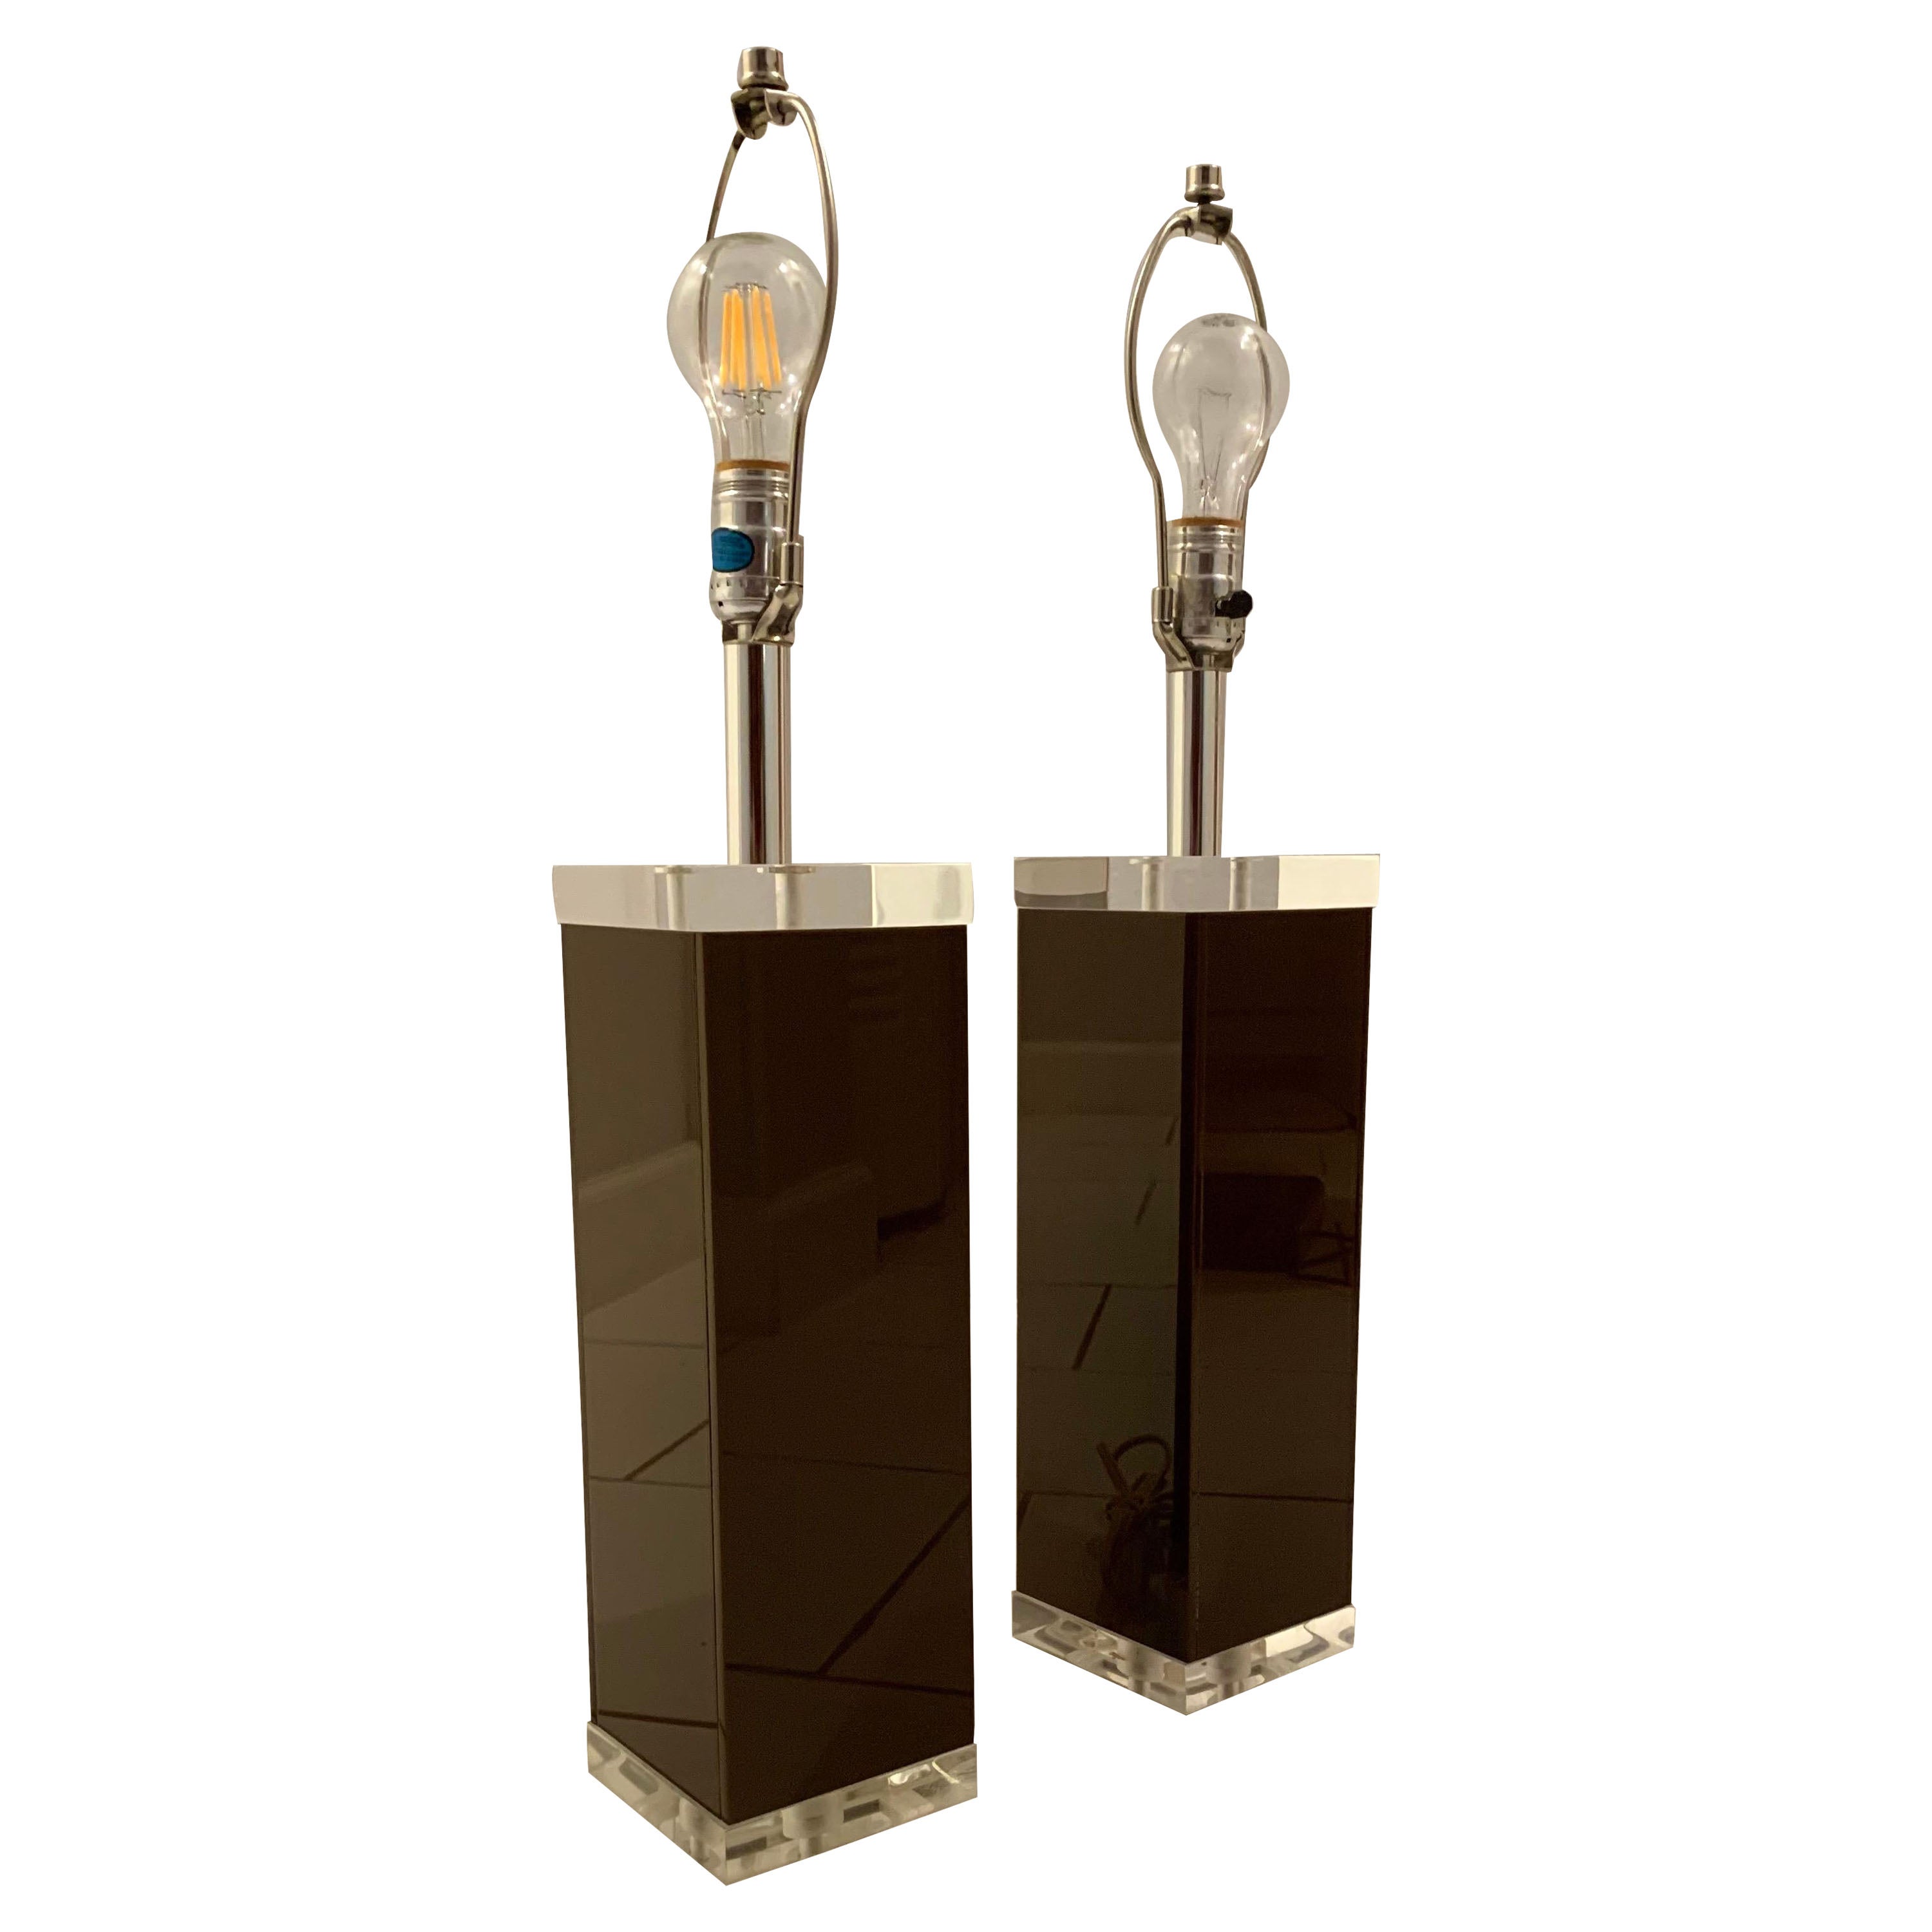 George Bullio Lucite Lamps in Brown and Clear, a Pair